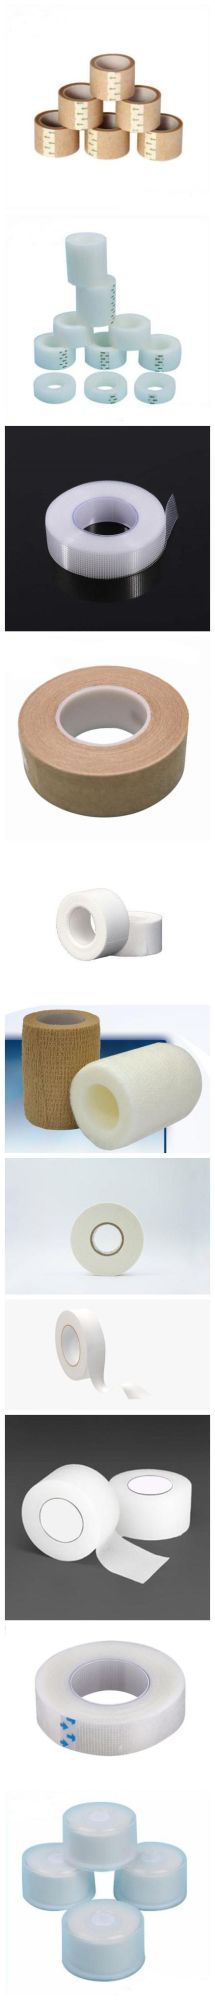 CE FDA Approved High Quality Waterproof Glue Medical Waterproof Adhesive Tape